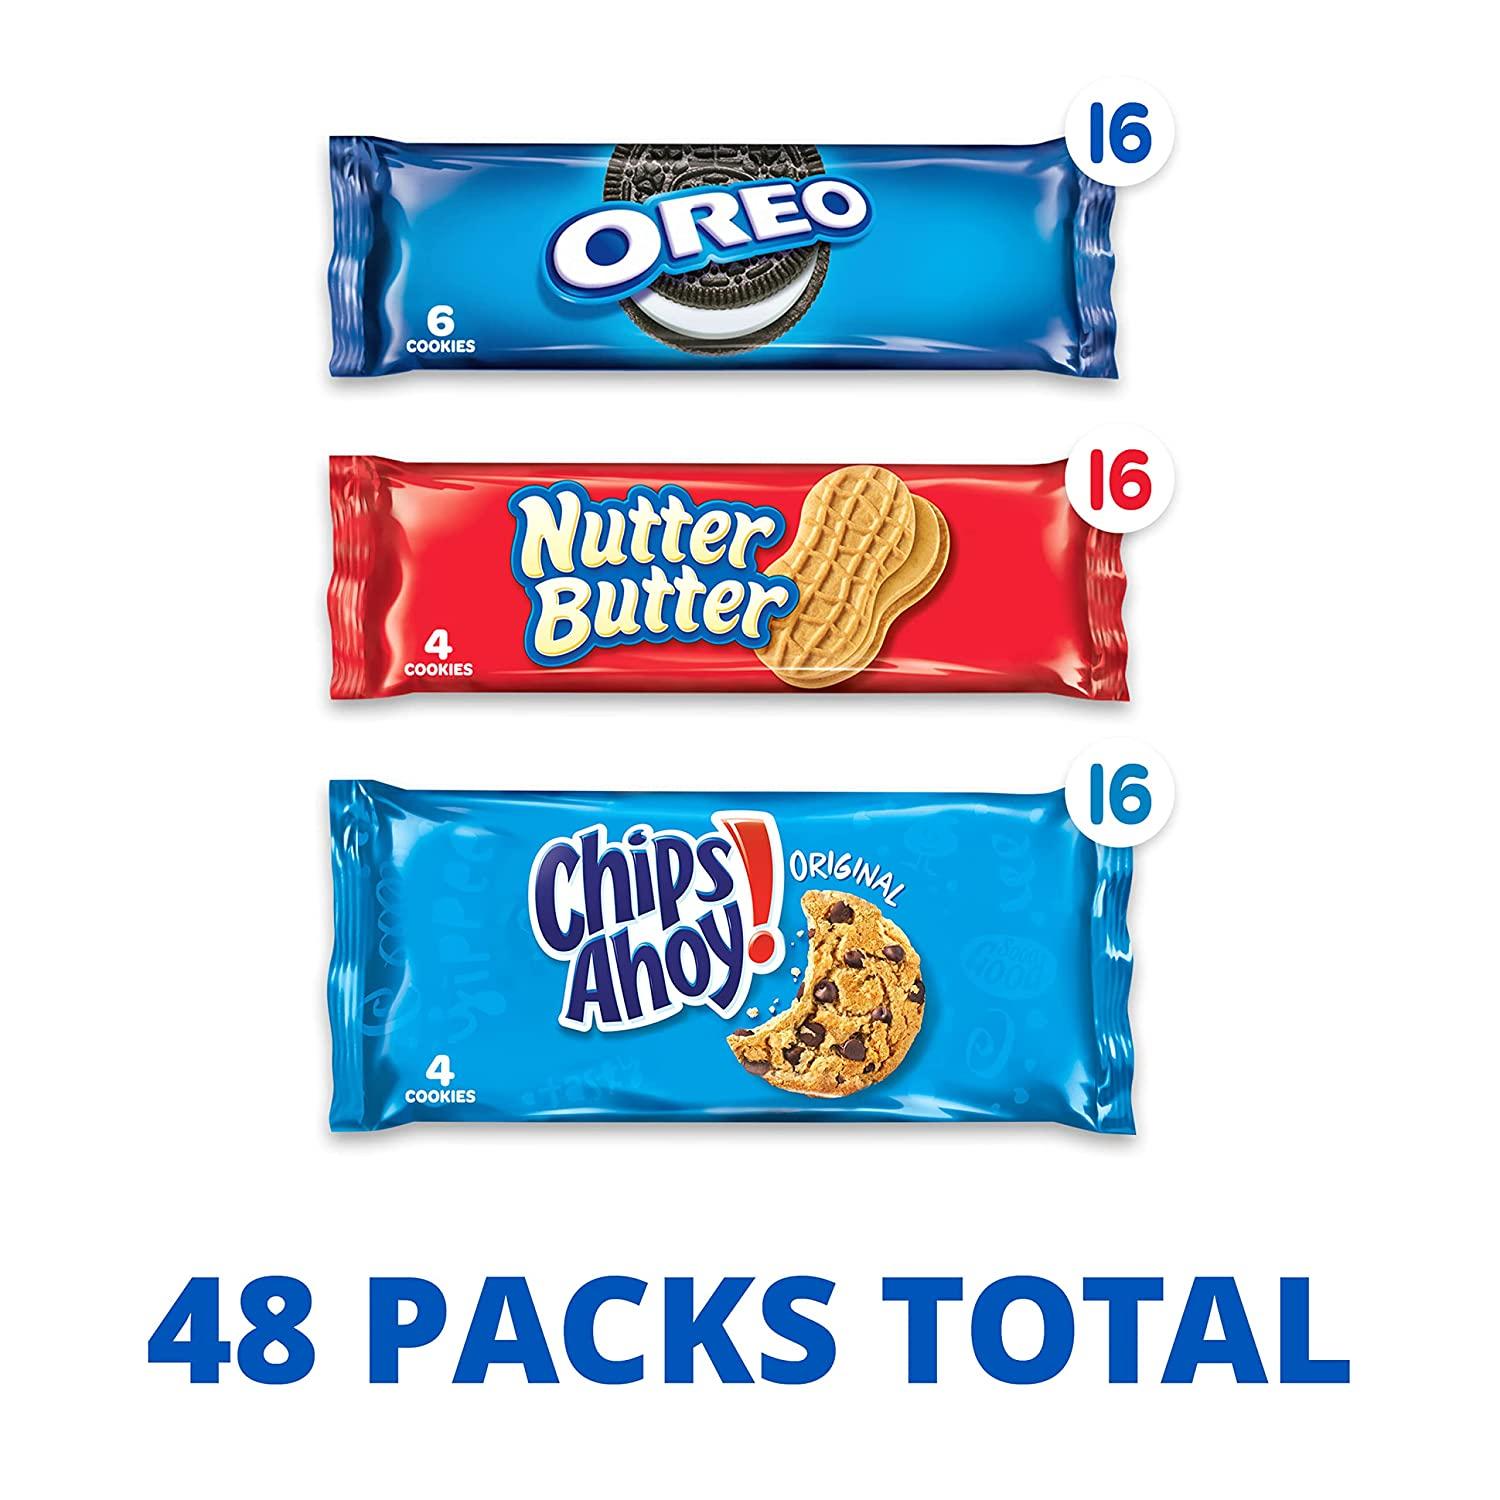 Nabisco Cookie Variety Pack, OREO, Nutter Butter, CHIPS AHOY!, 4 - 12 ...